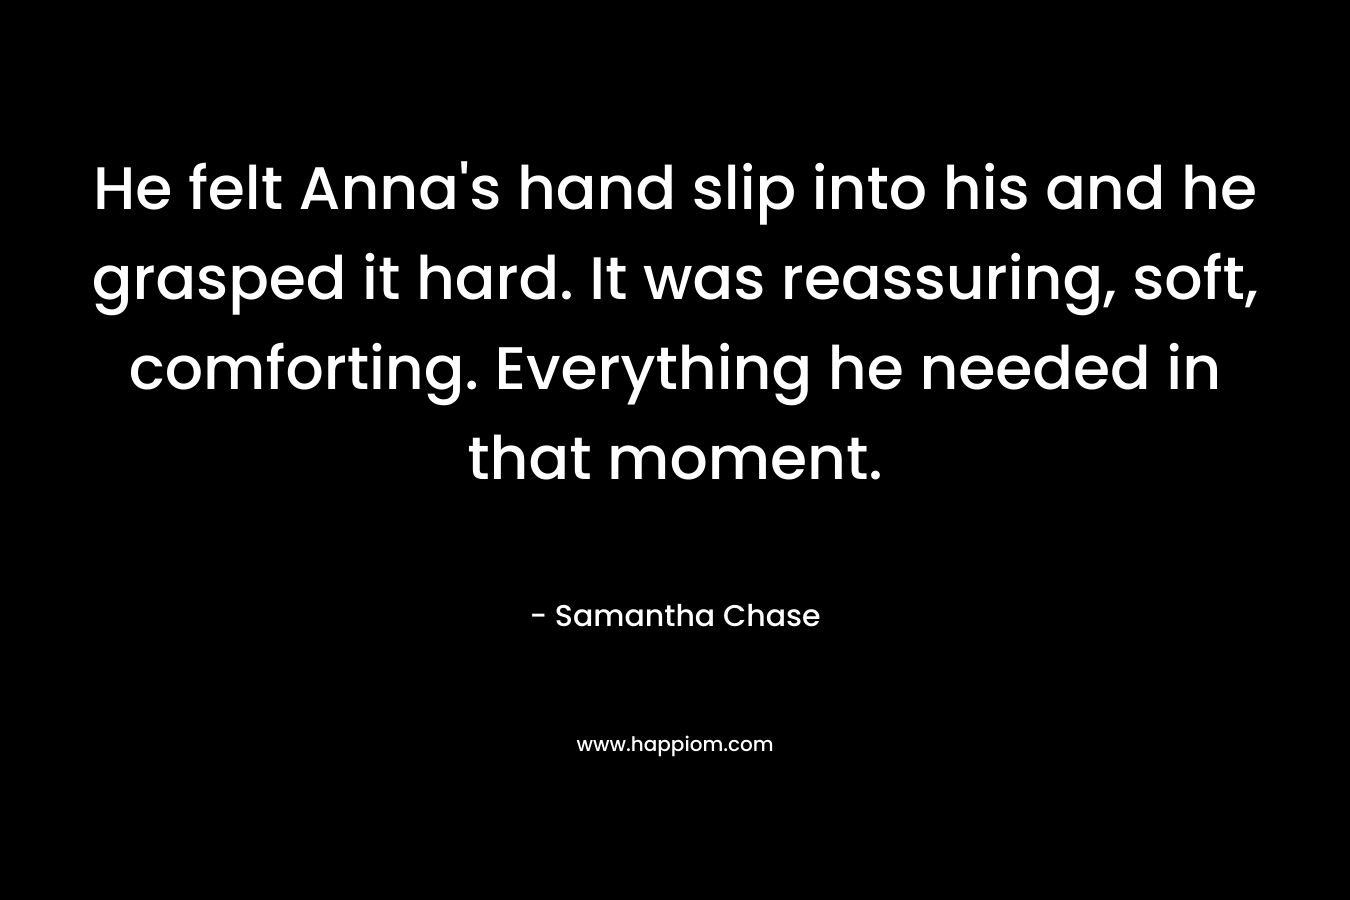 He felt Anna's hand slip into his and he grasped it hard. It was reassuring, soft, comforting. Everything he needed in that moment.